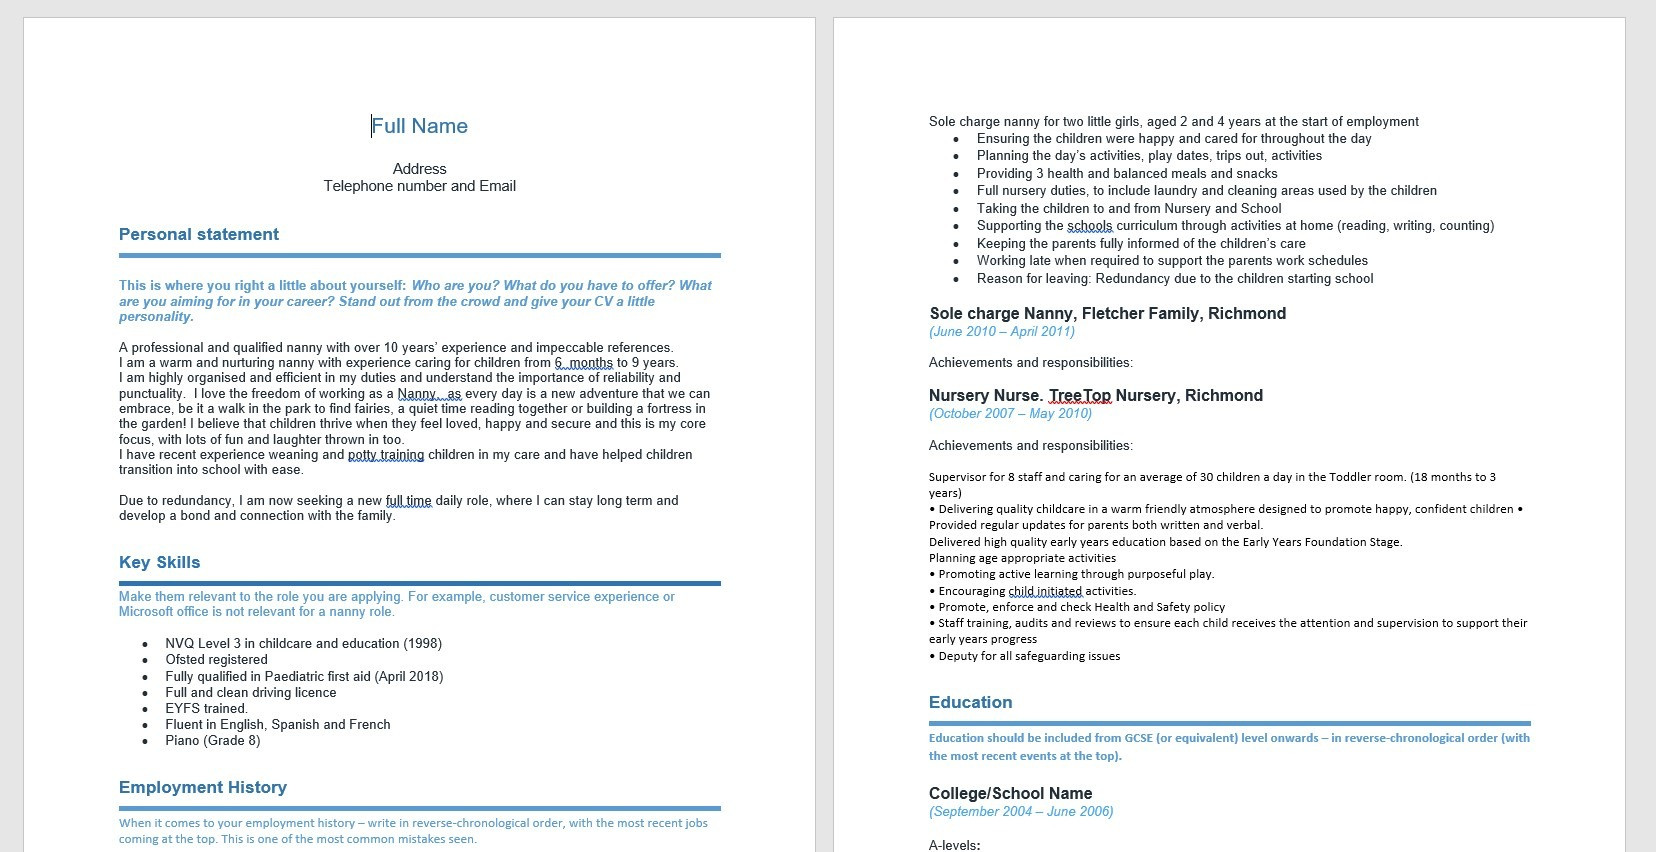 Resume Sample for A Nanny Housekeeper Cv’s for Nannies, Made Easy…. Our Handy Nanny Cv Template …